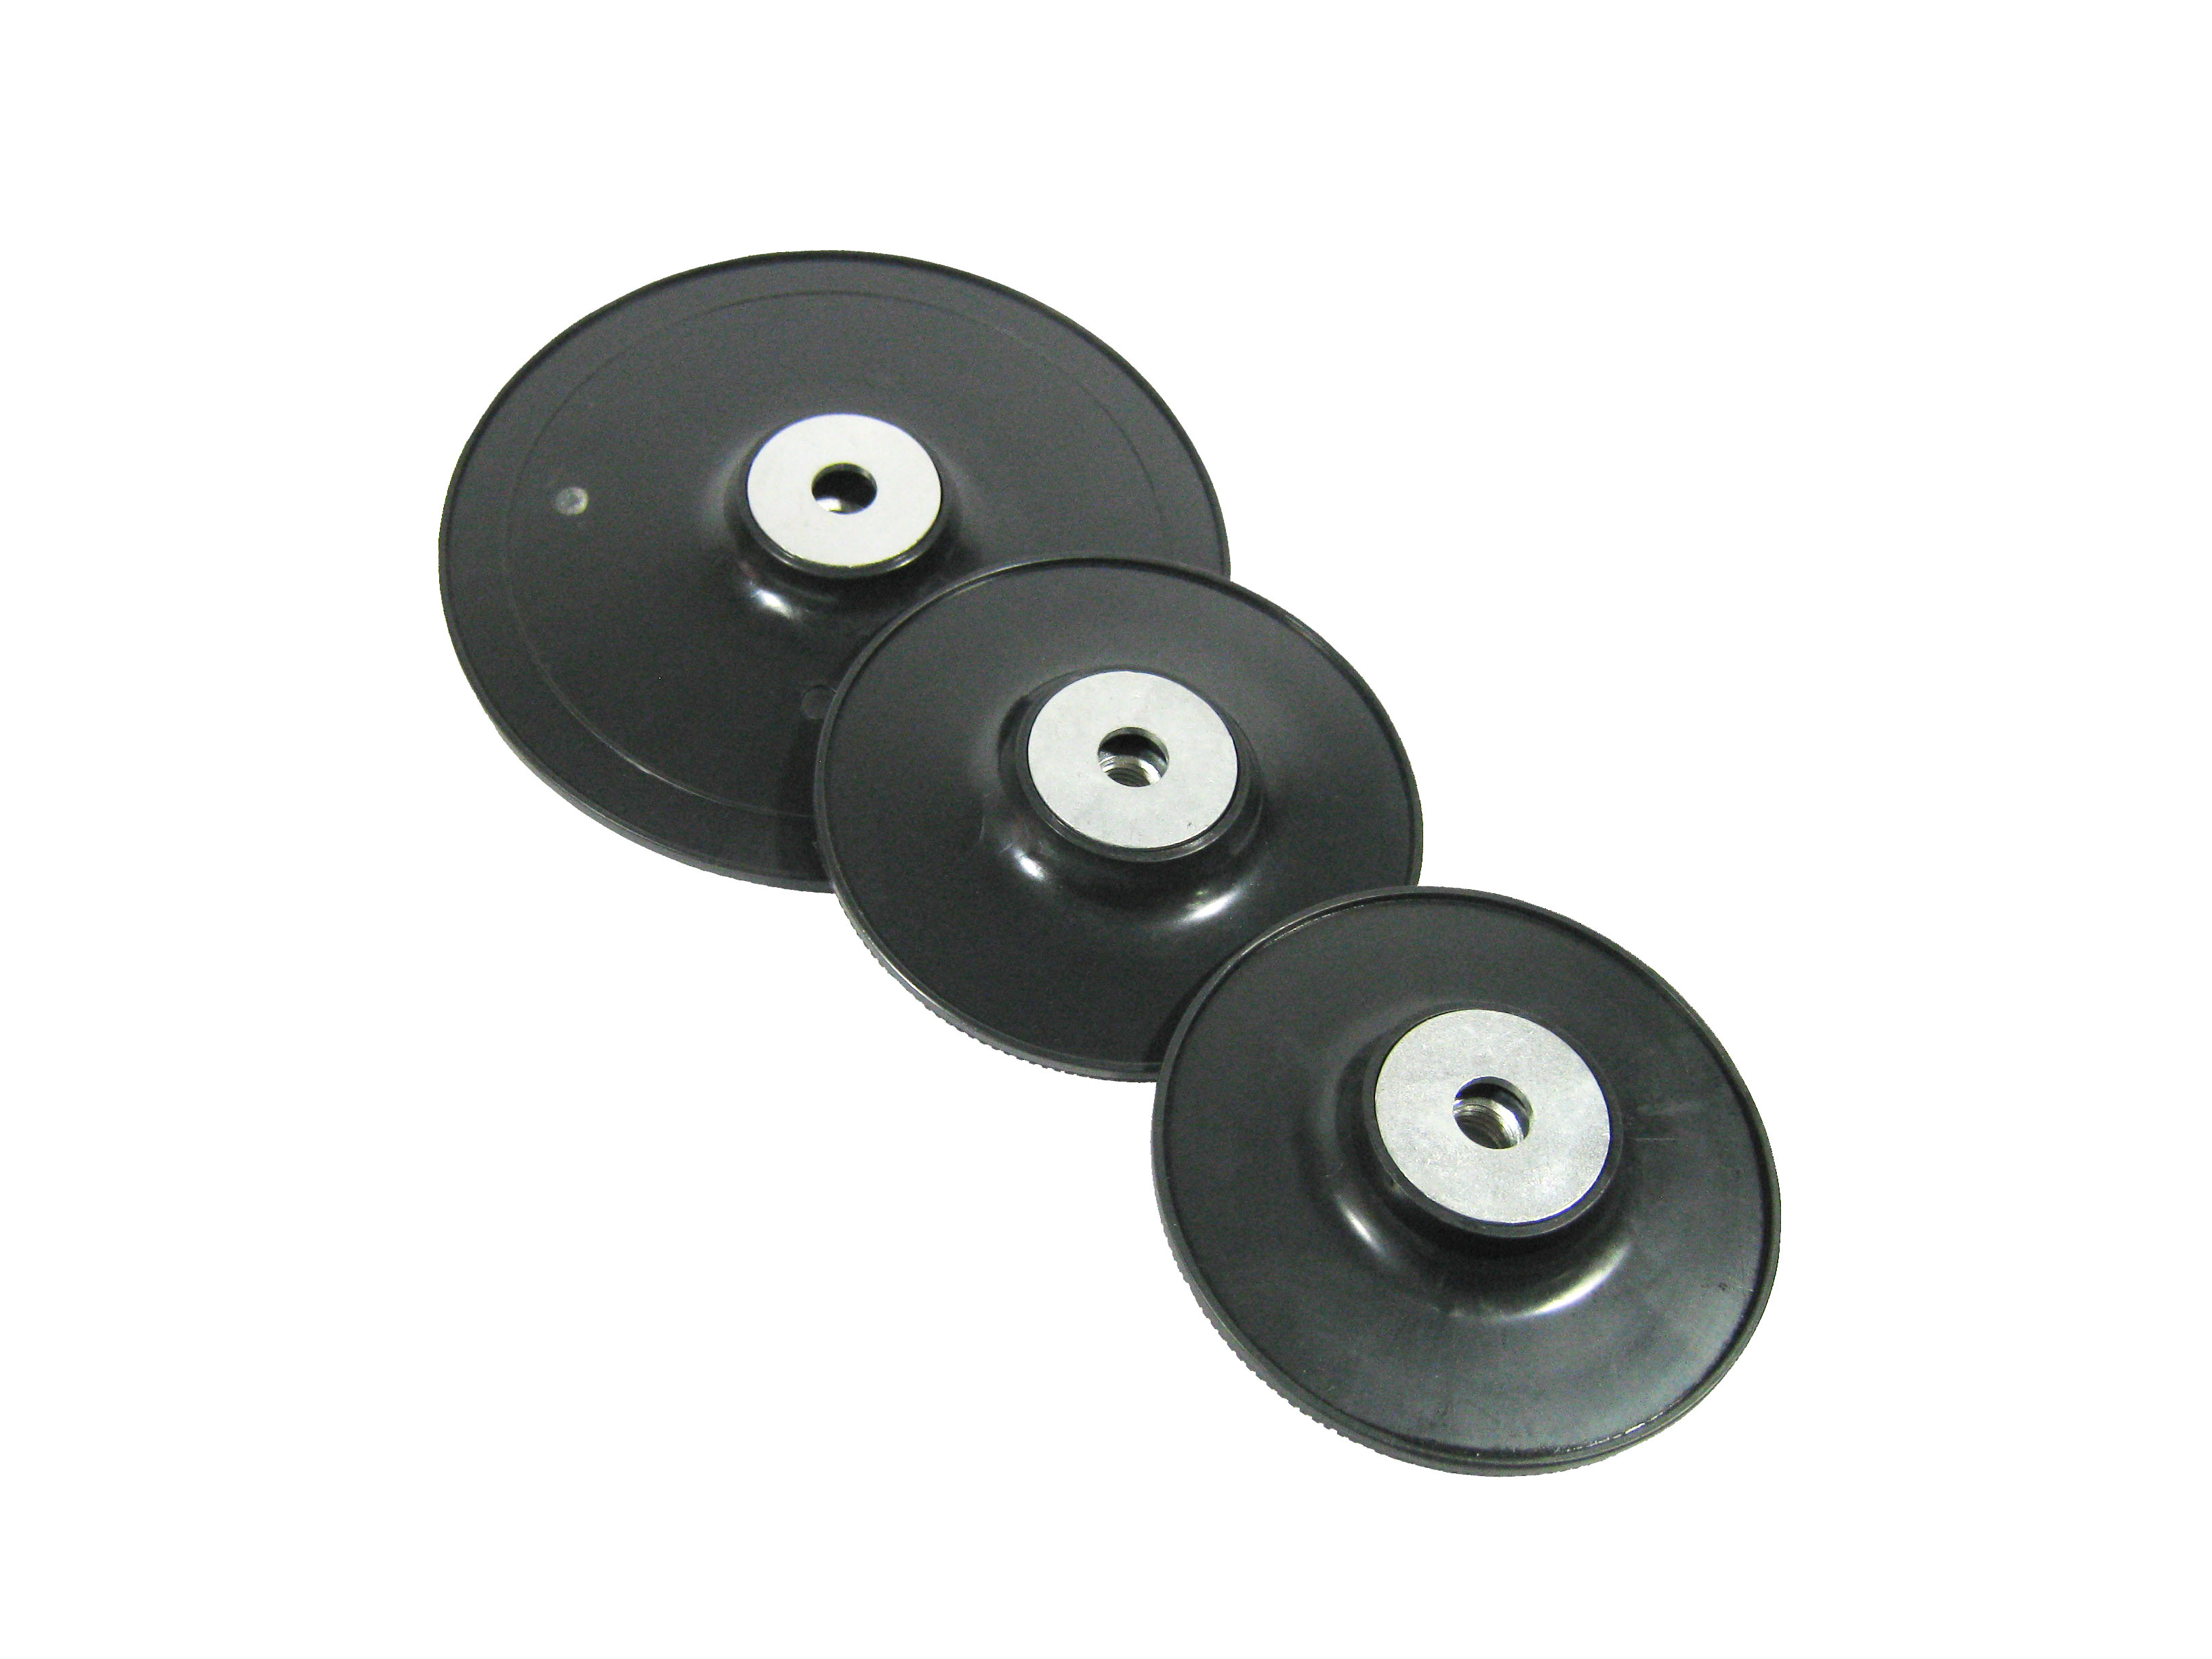 Angle grinding disc angle grinder accessories steel paper grinding disc special